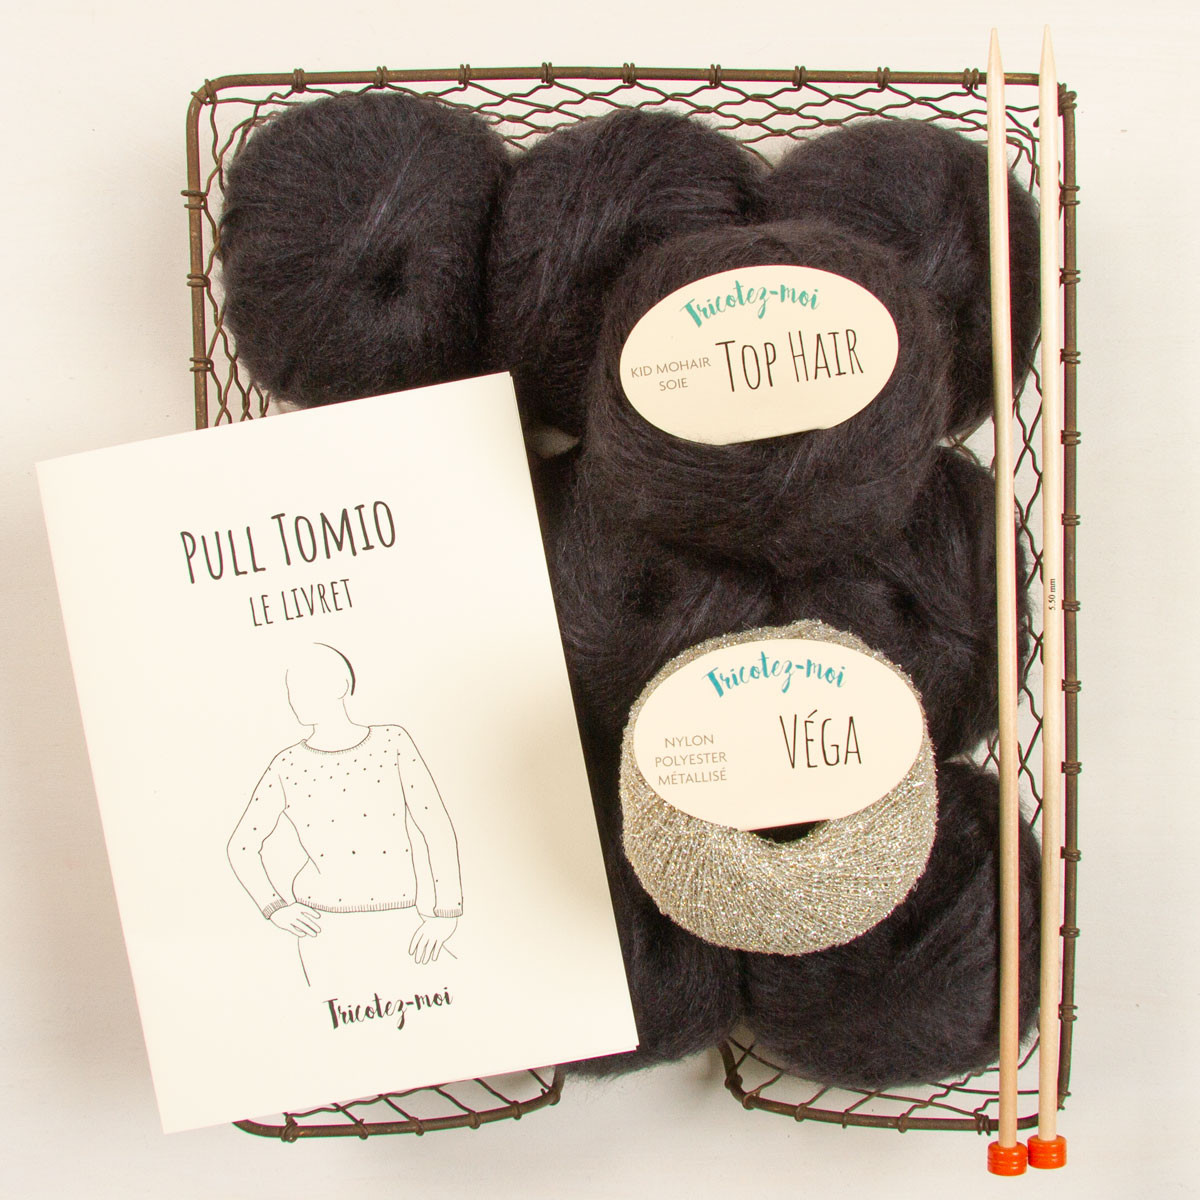 Tomio ready-to-knit sweater